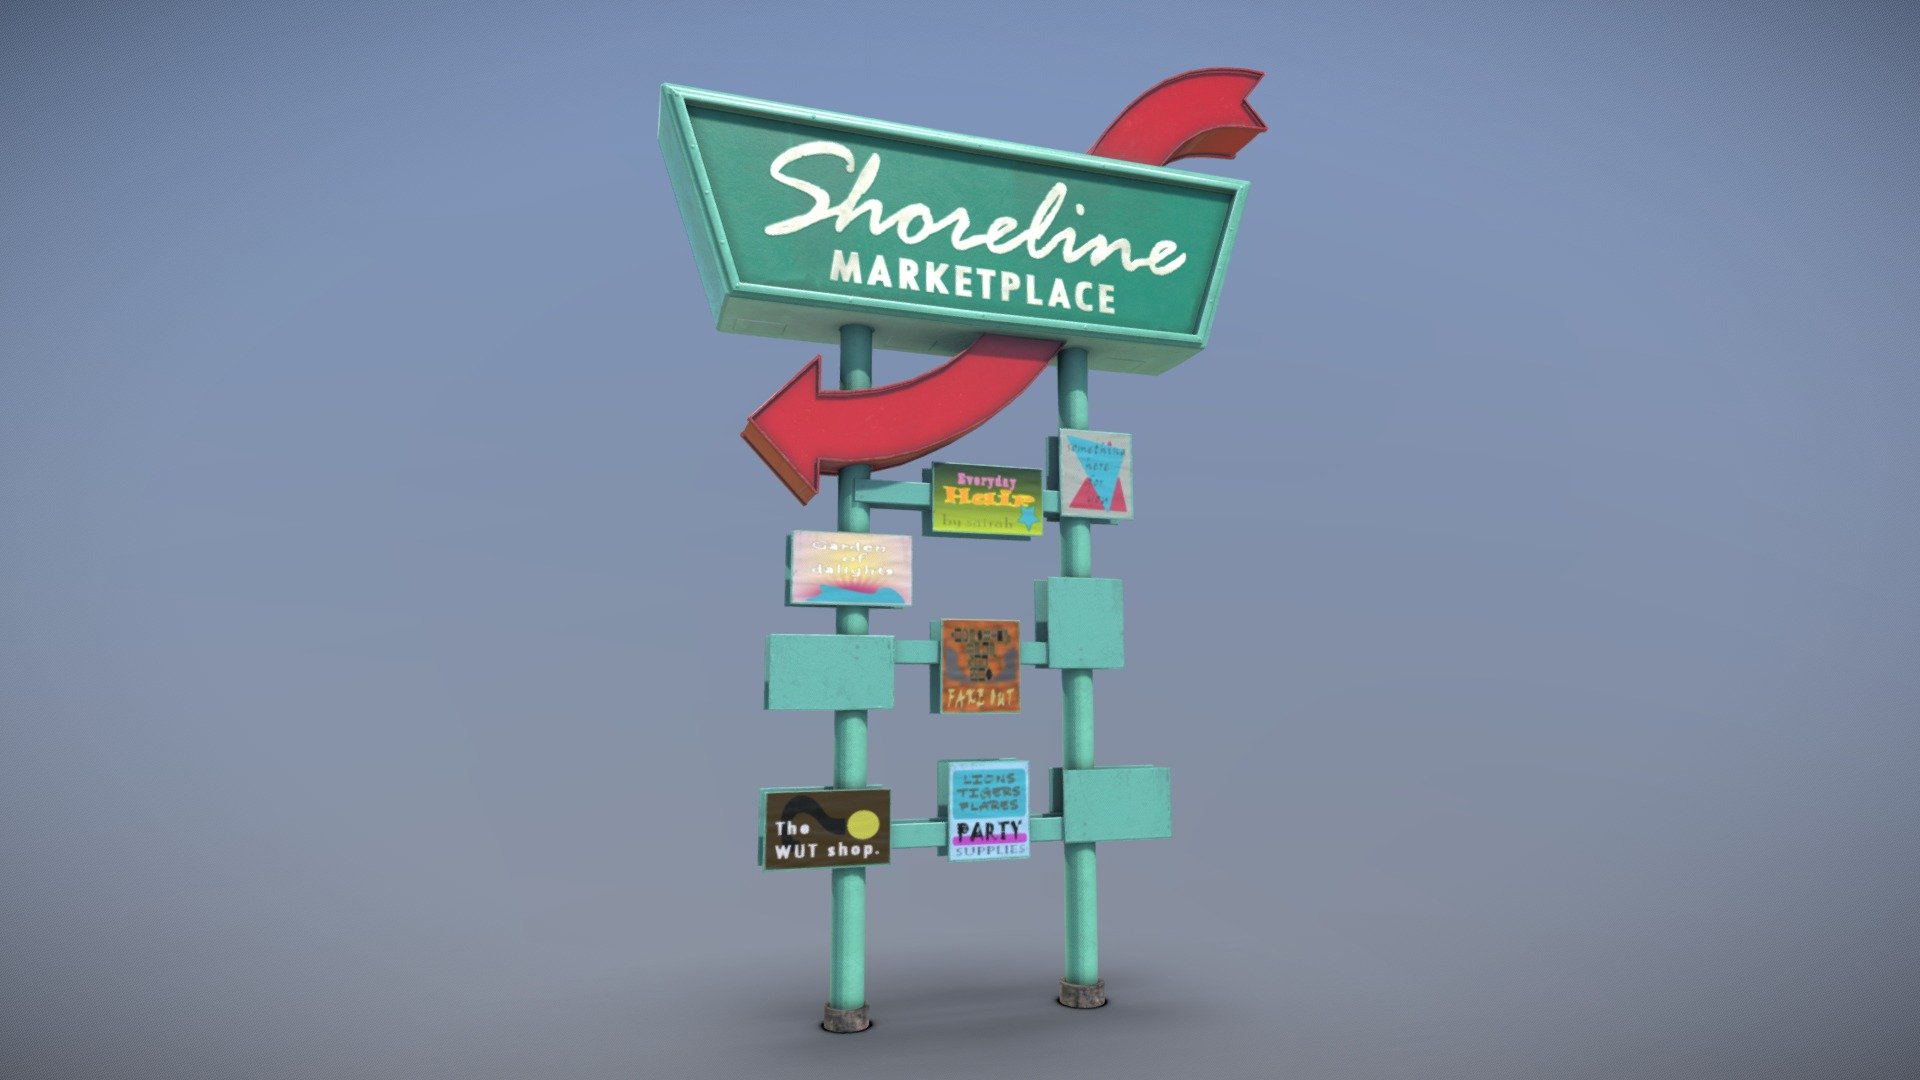 I saw this old mall sign (still in use!) and wanted to do a portrait 3d model